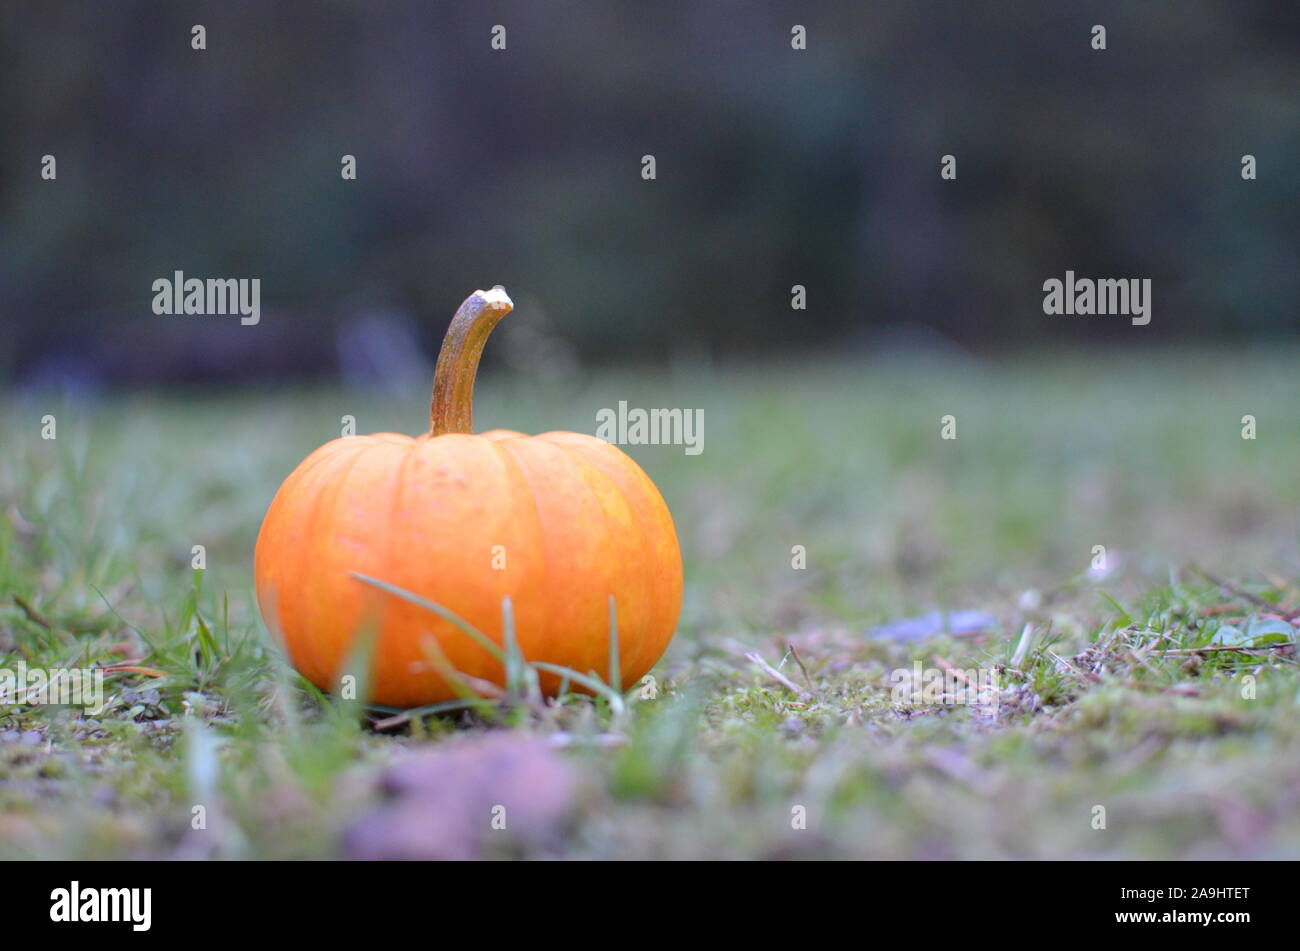 A small pumpkin with a blurred background Stock Photo